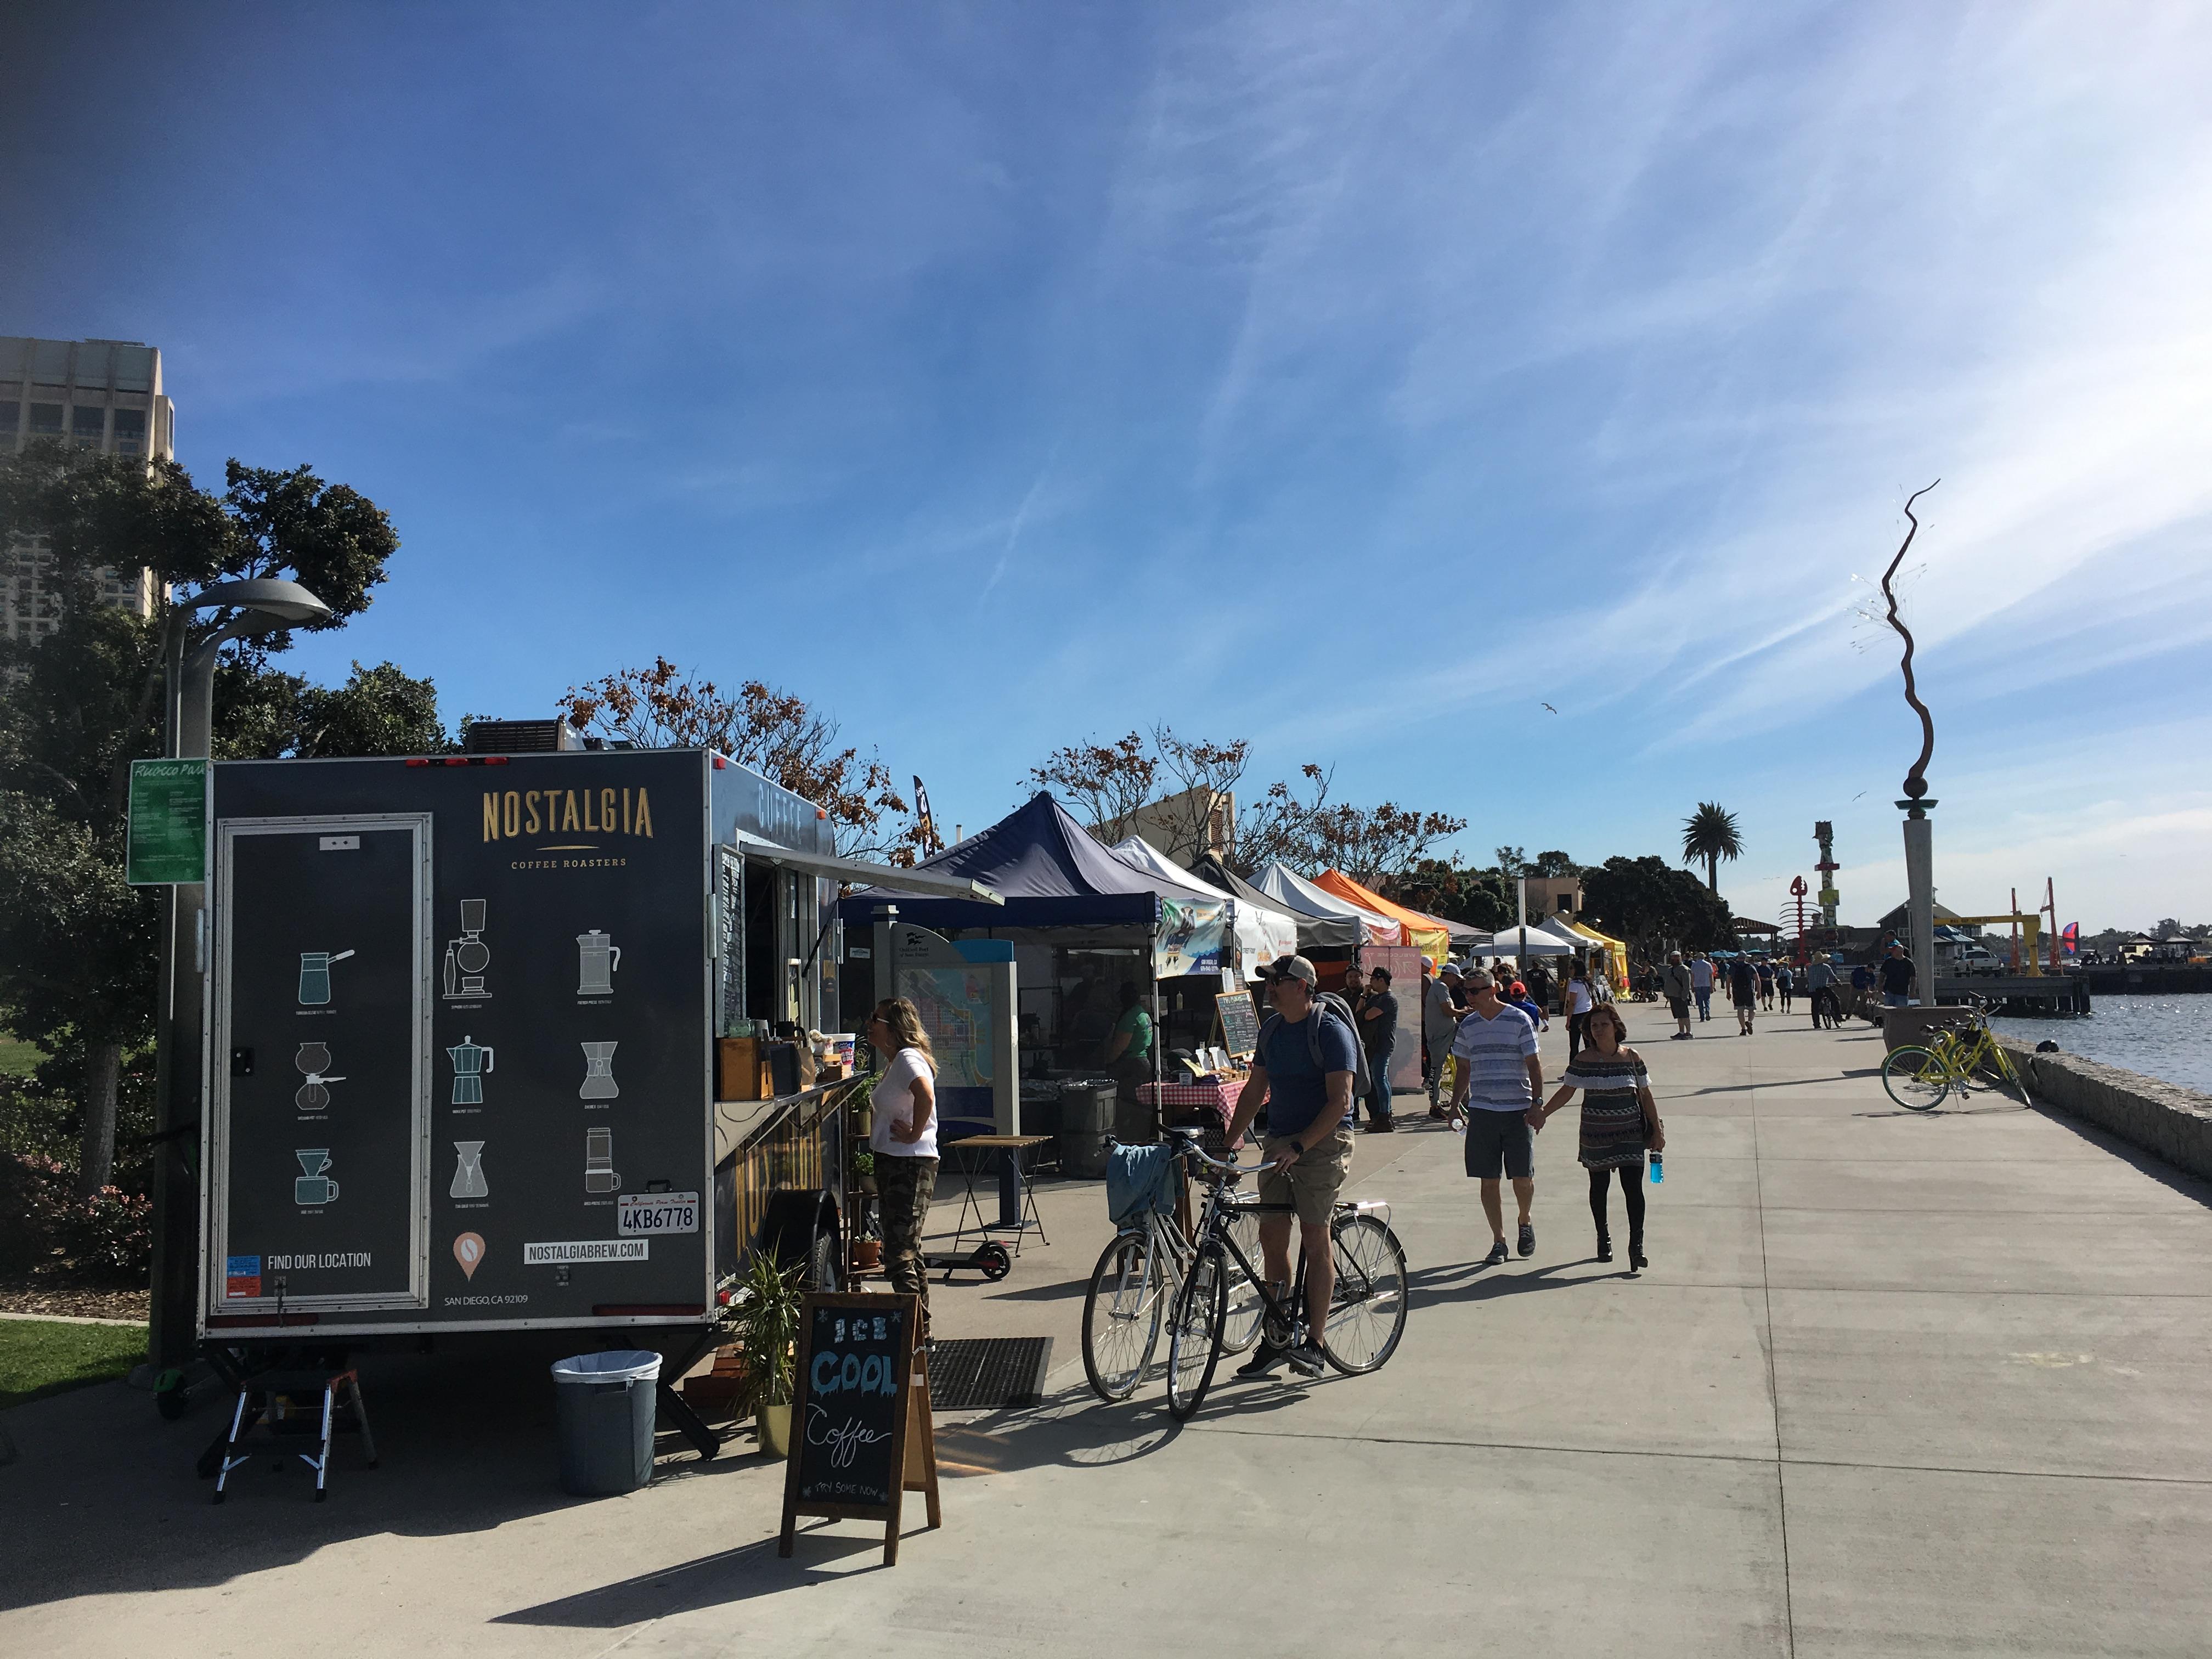 Ruocco Park Market - Street Food & Crafts on the Bay